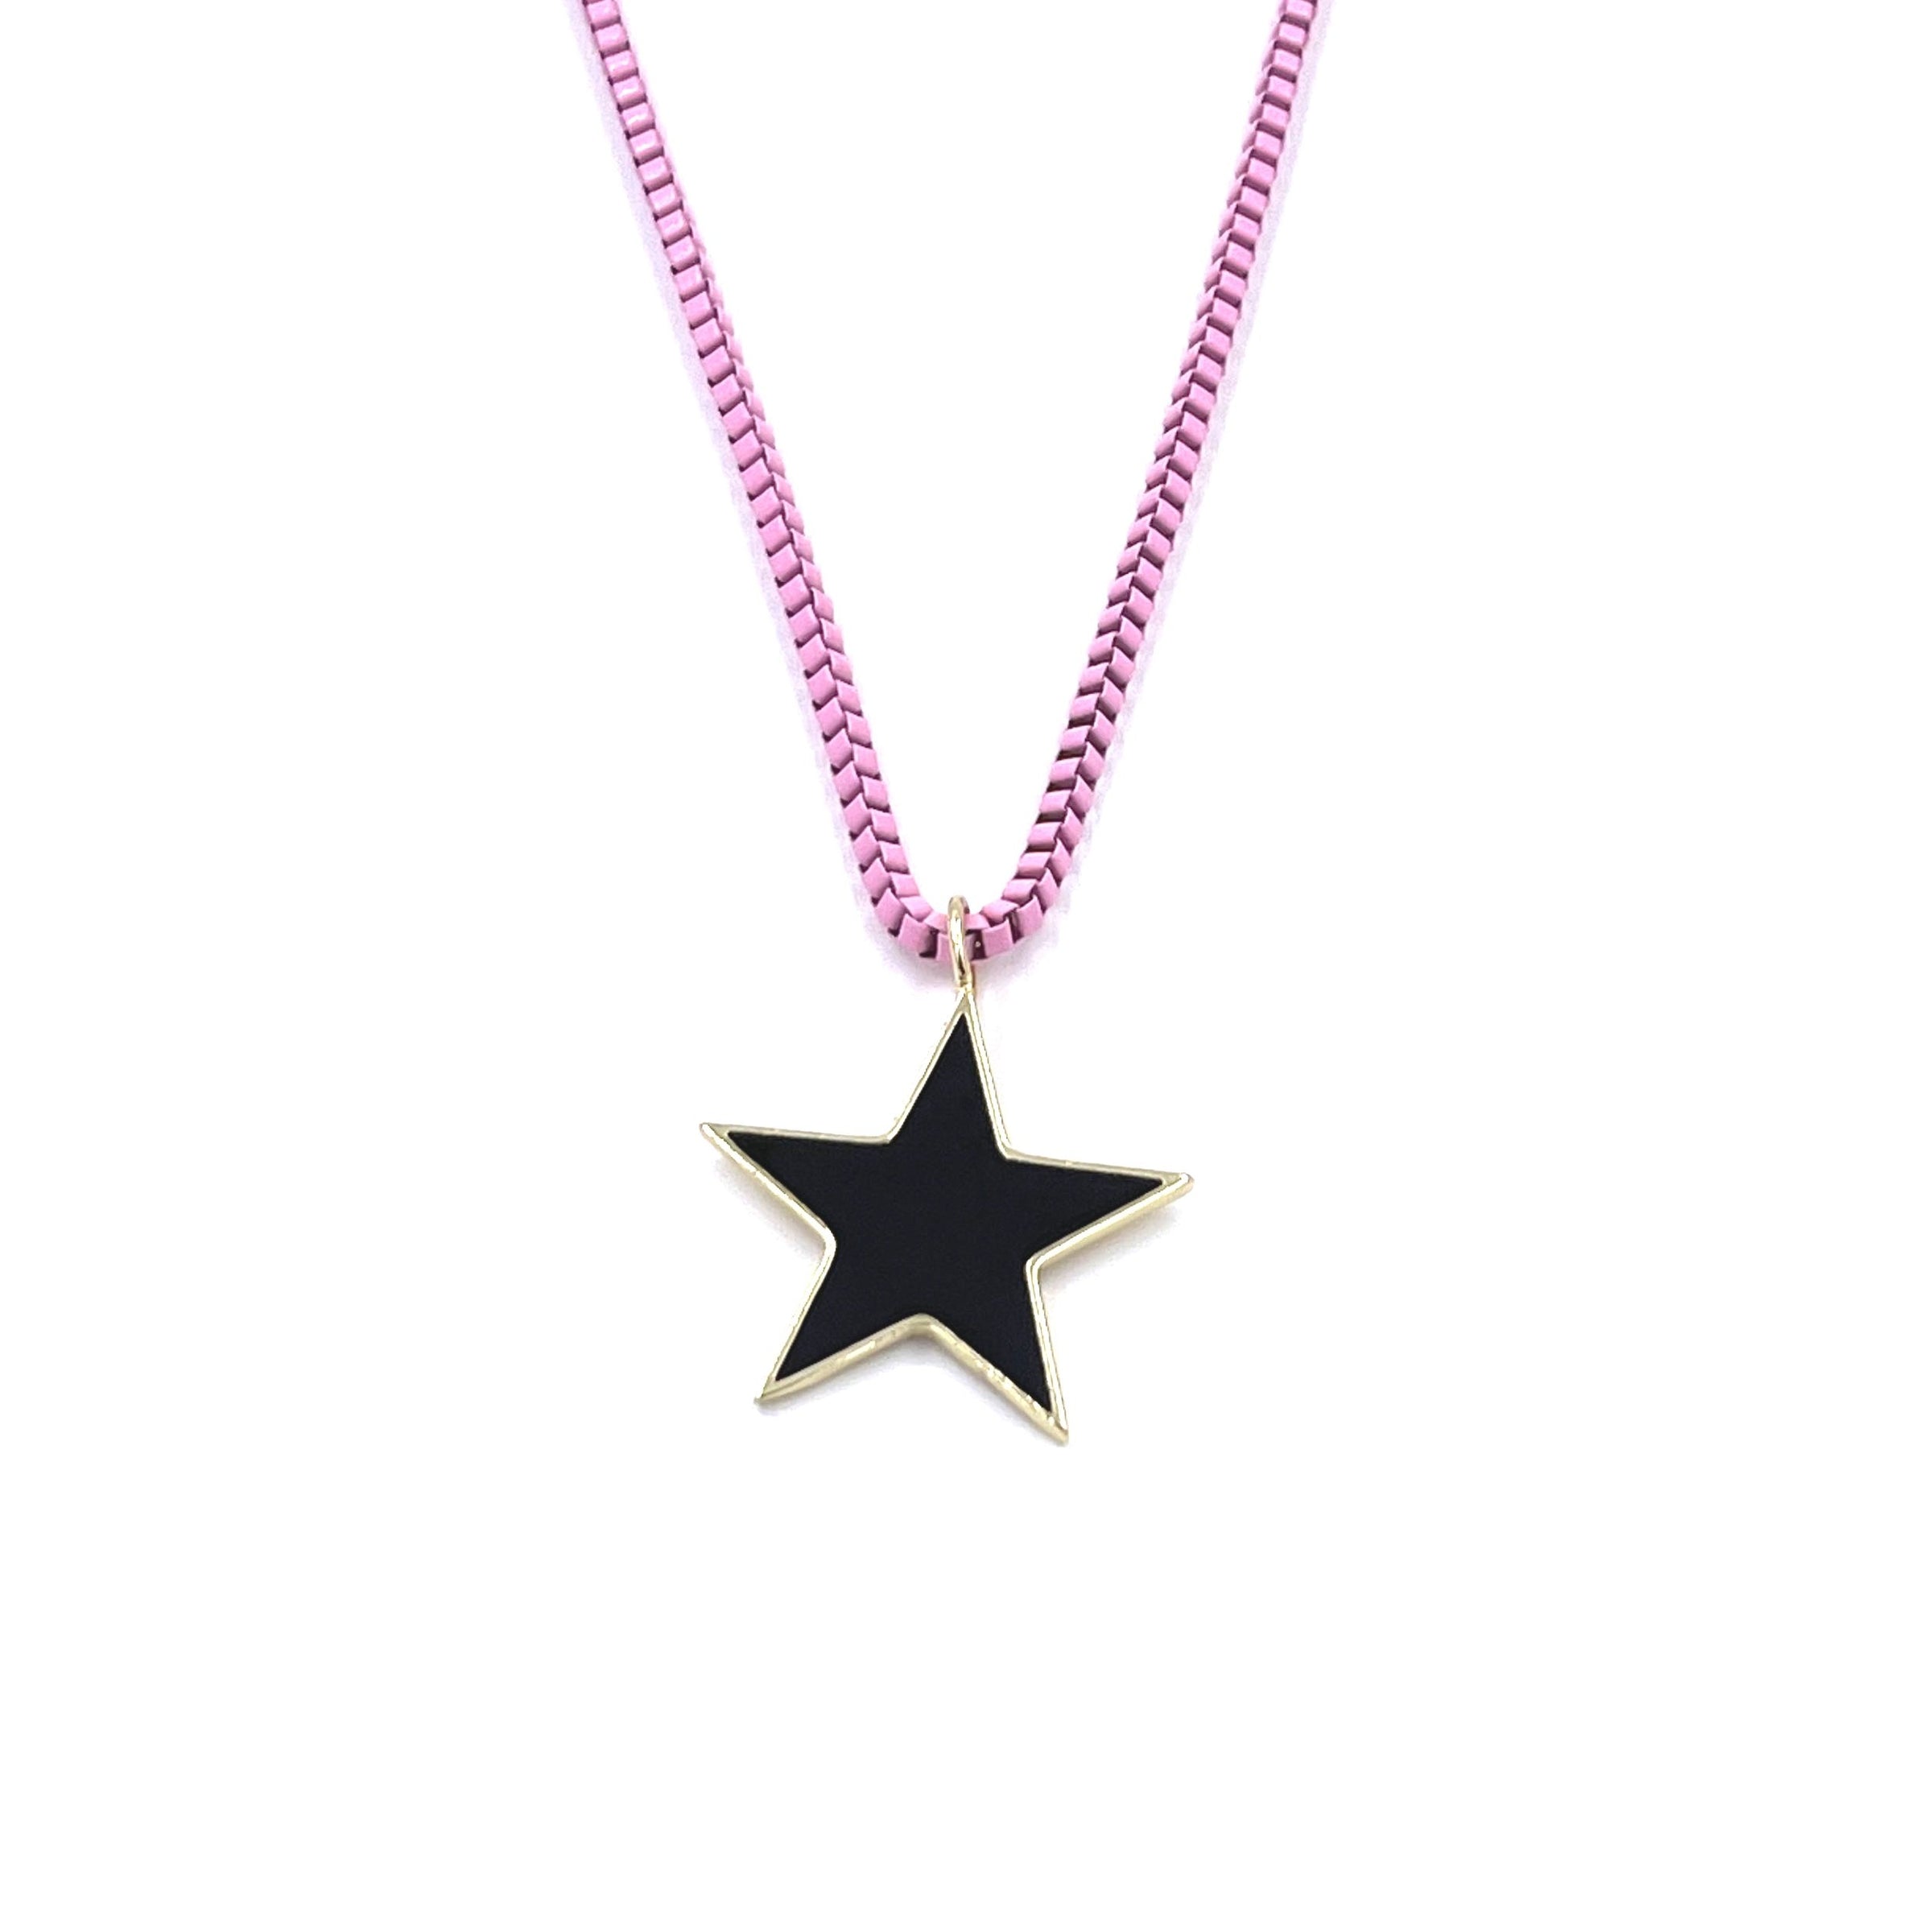 LARGE LIGHT PINK STAR necklace – Mazza Boutique